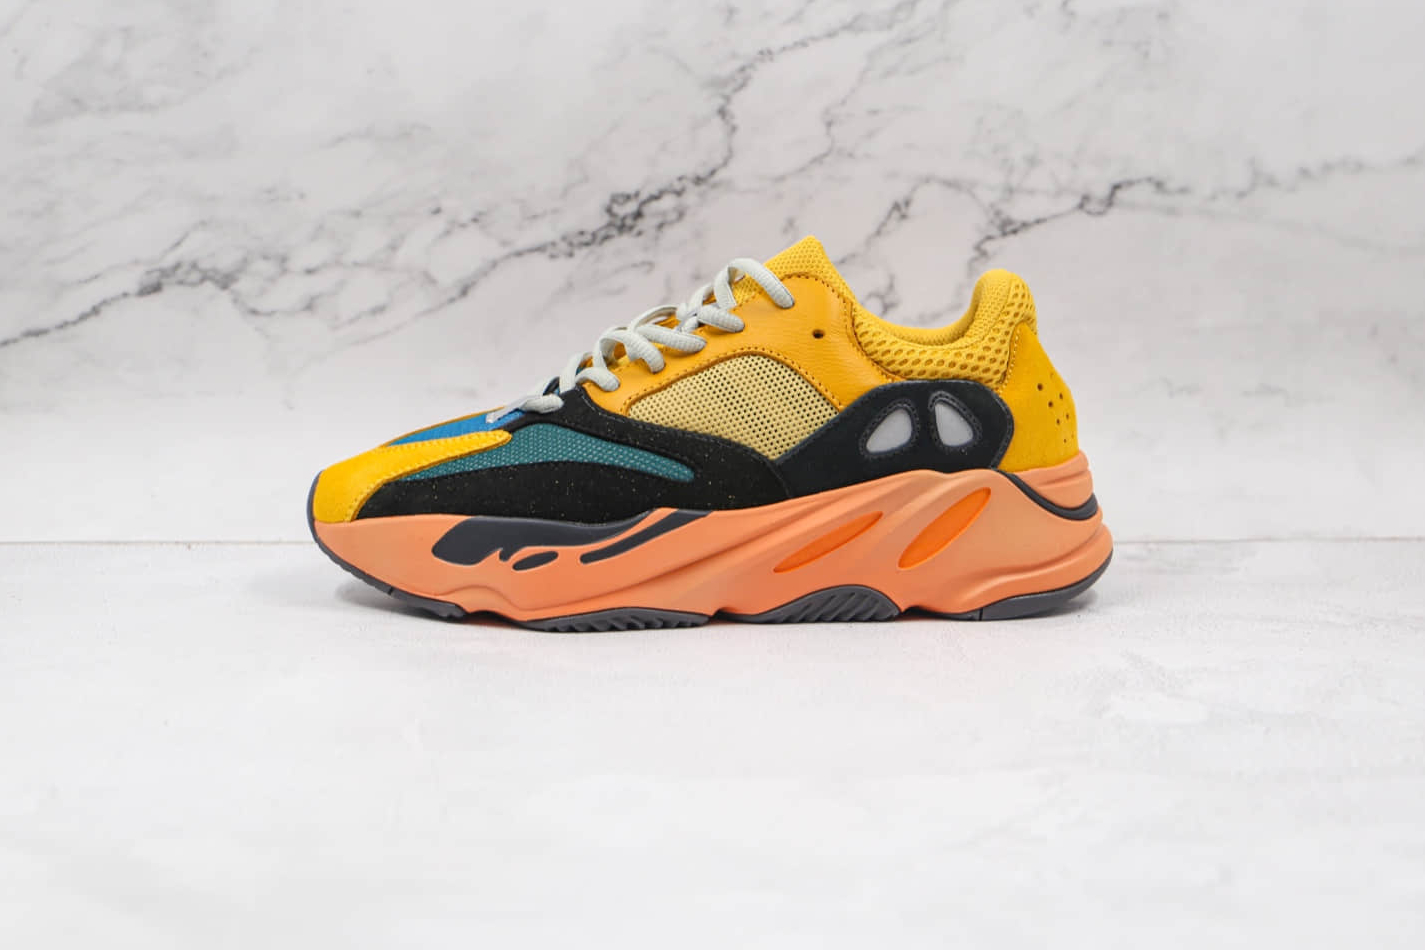 Adidas Yeezy Boost 700 'Sun' GZ6984 - Shop the Latest Release